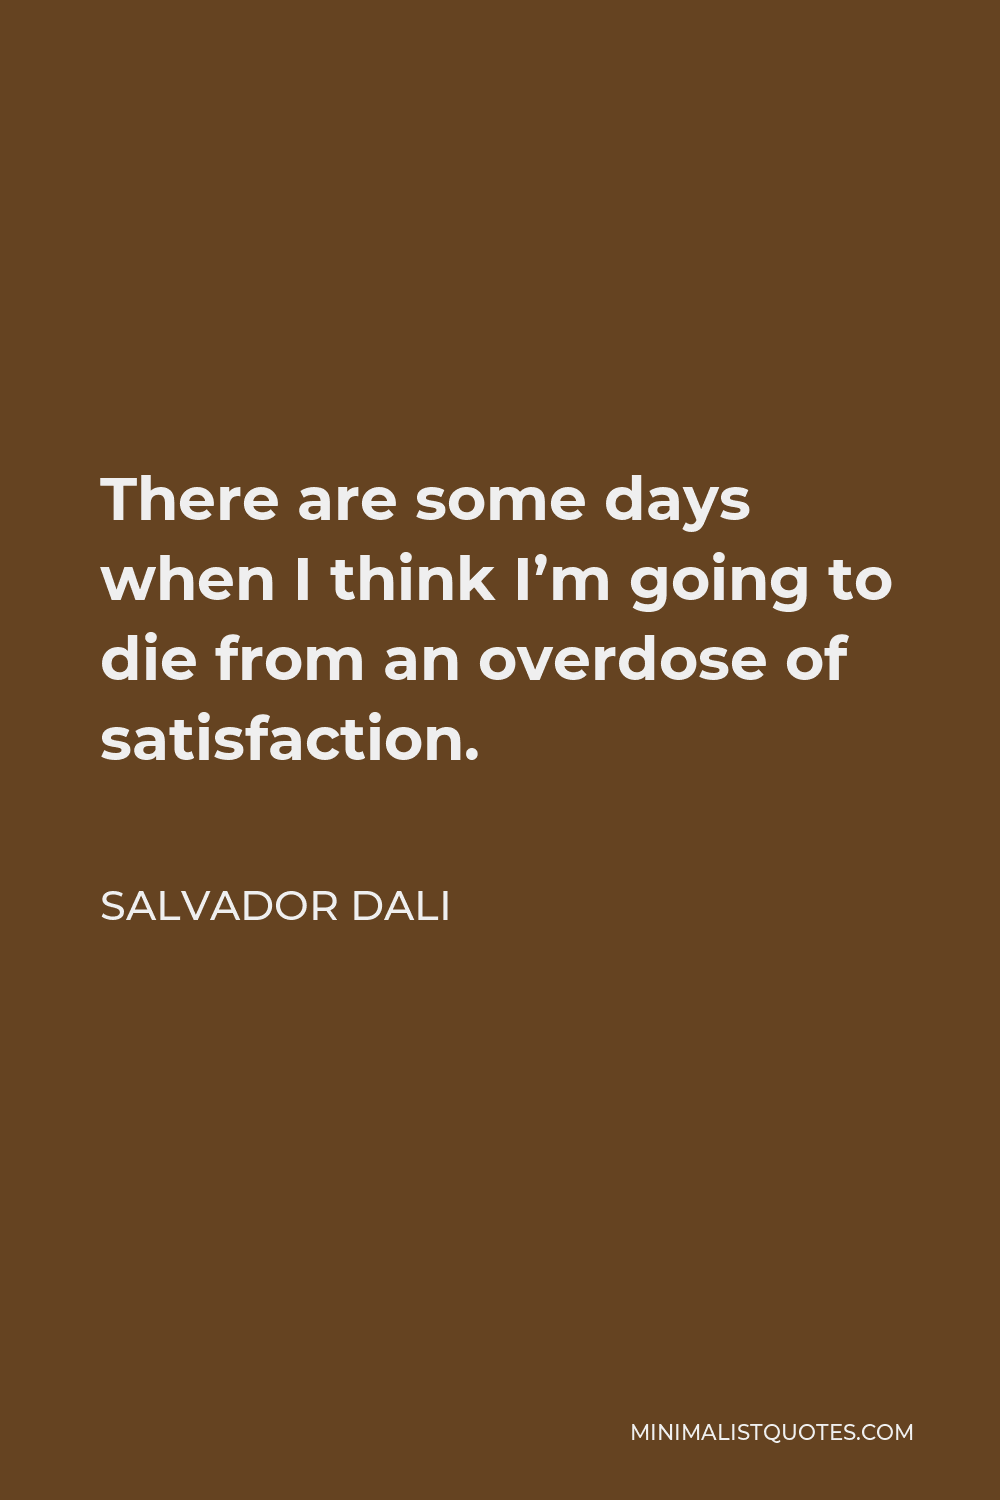 Salvador Dali Quote - There are some days when I think I’m going to die from an overdose of satisfaction.